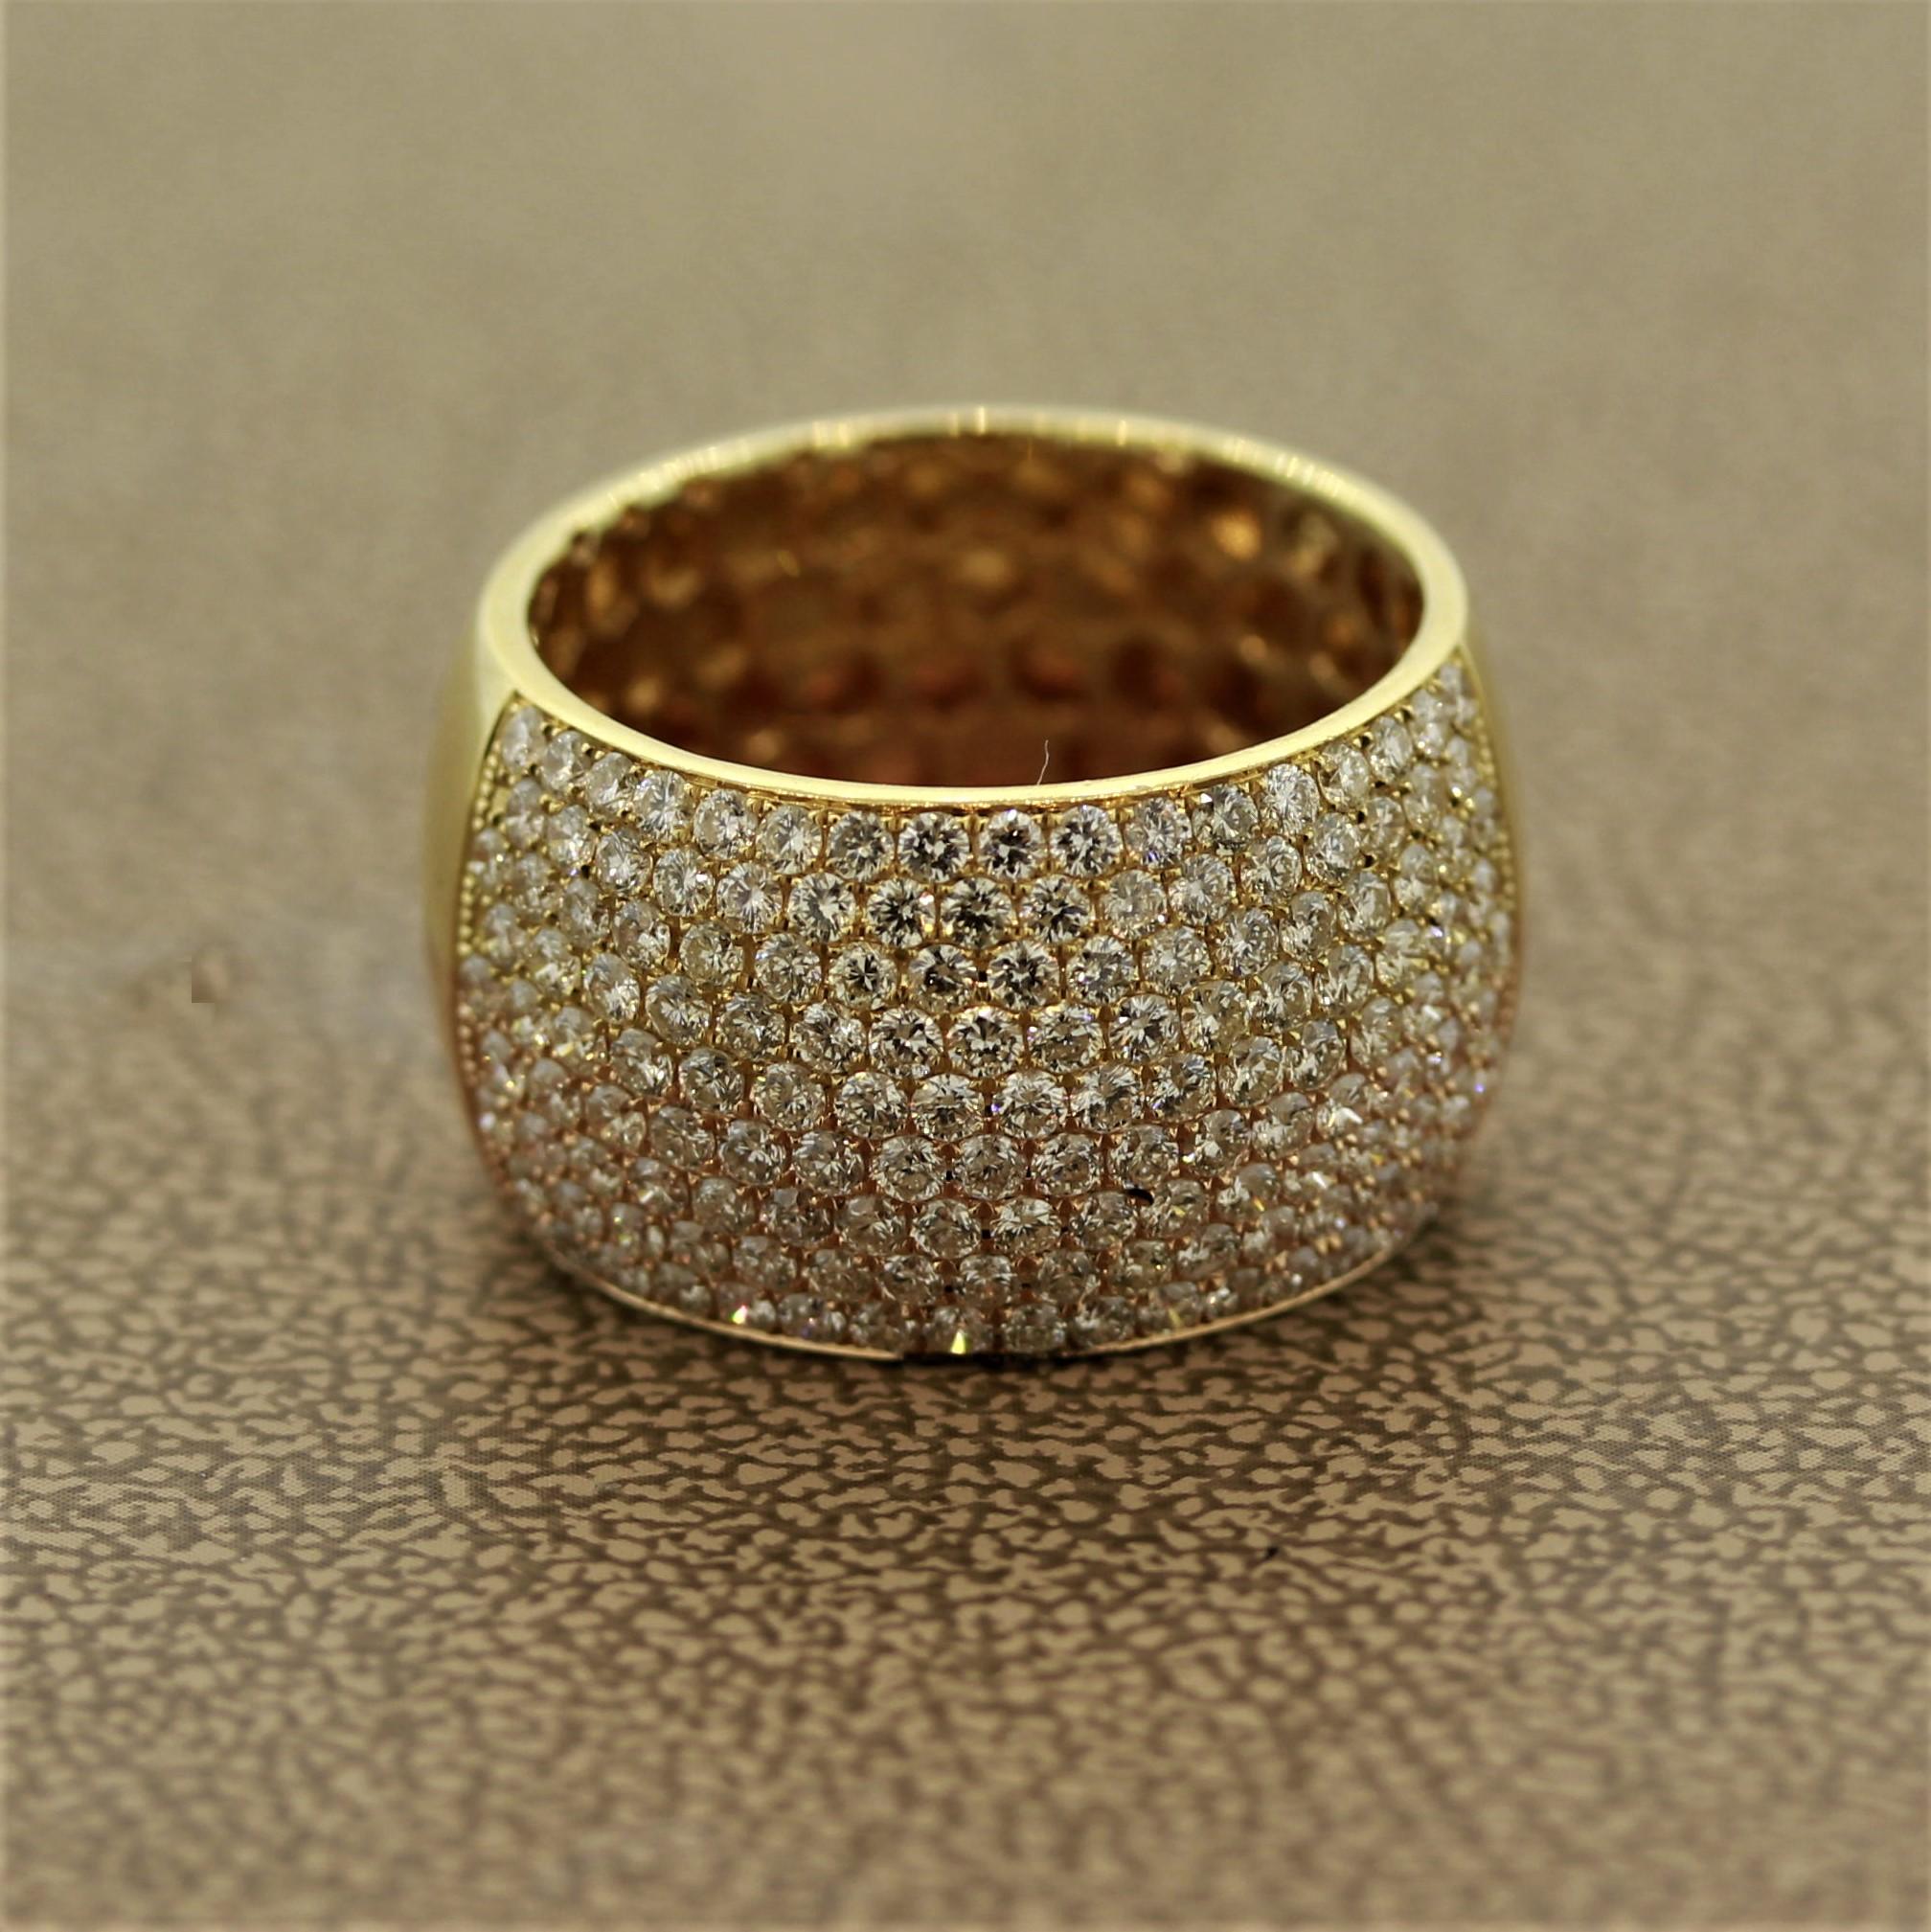 A wide and lovely ring featuring 1.77 carats of round brilliant cut diamonds. The ring is made in 18k gold, half in yellow and the other in rose gold split down the middle. A unique piece that can be worn daily.

Ring Size 7